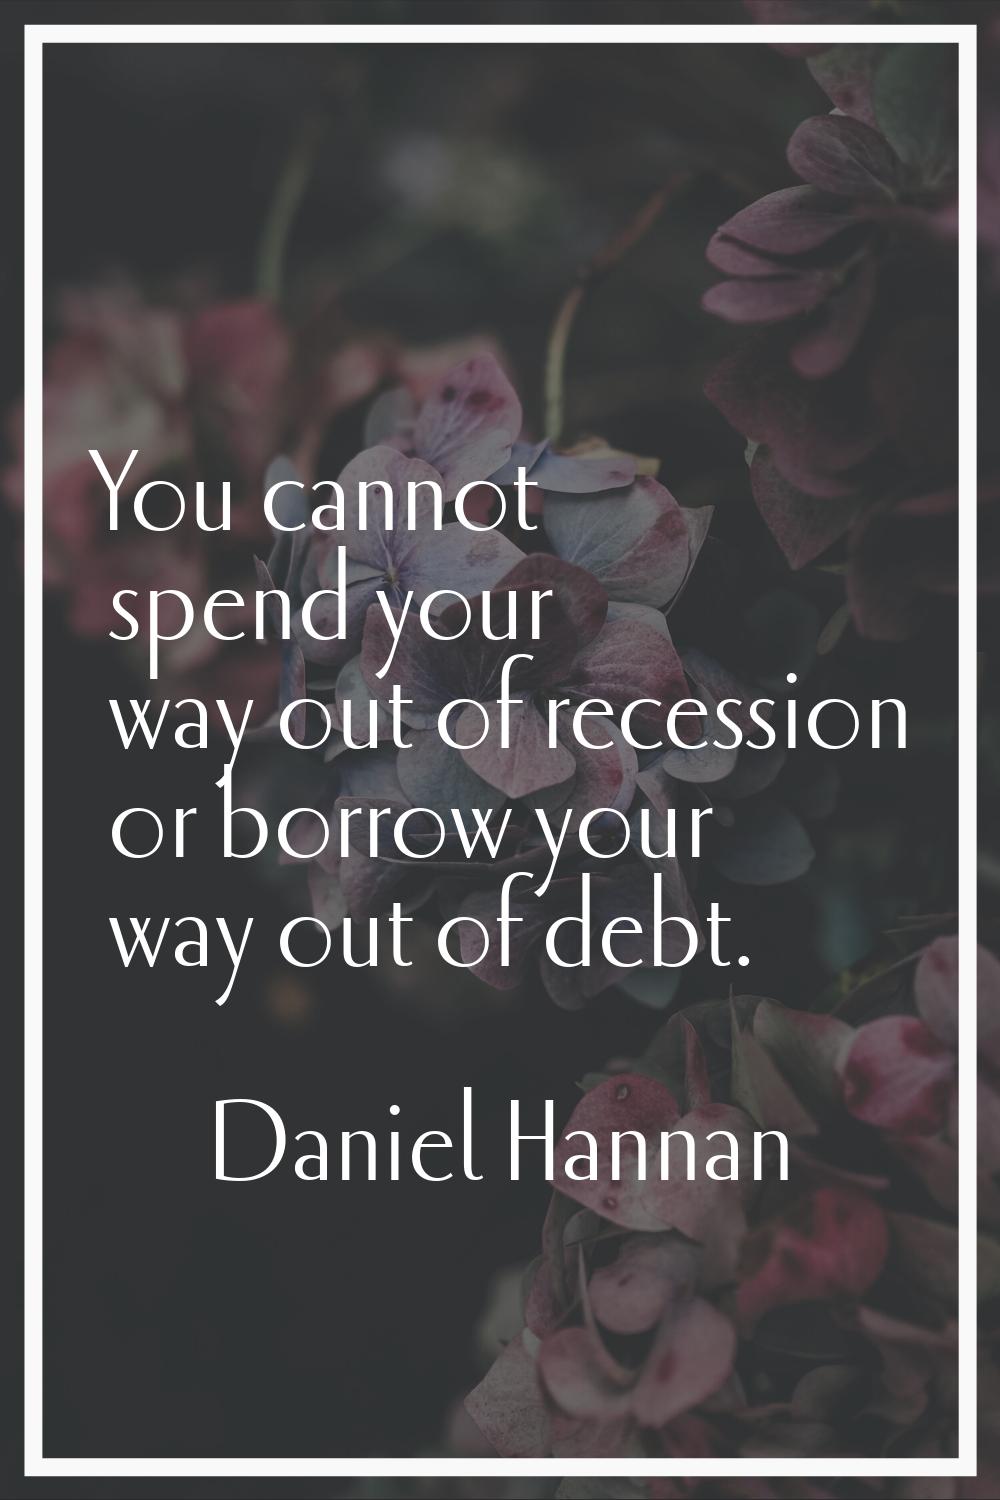 You cannot spend your way out of recession or borrow your way out of debt.